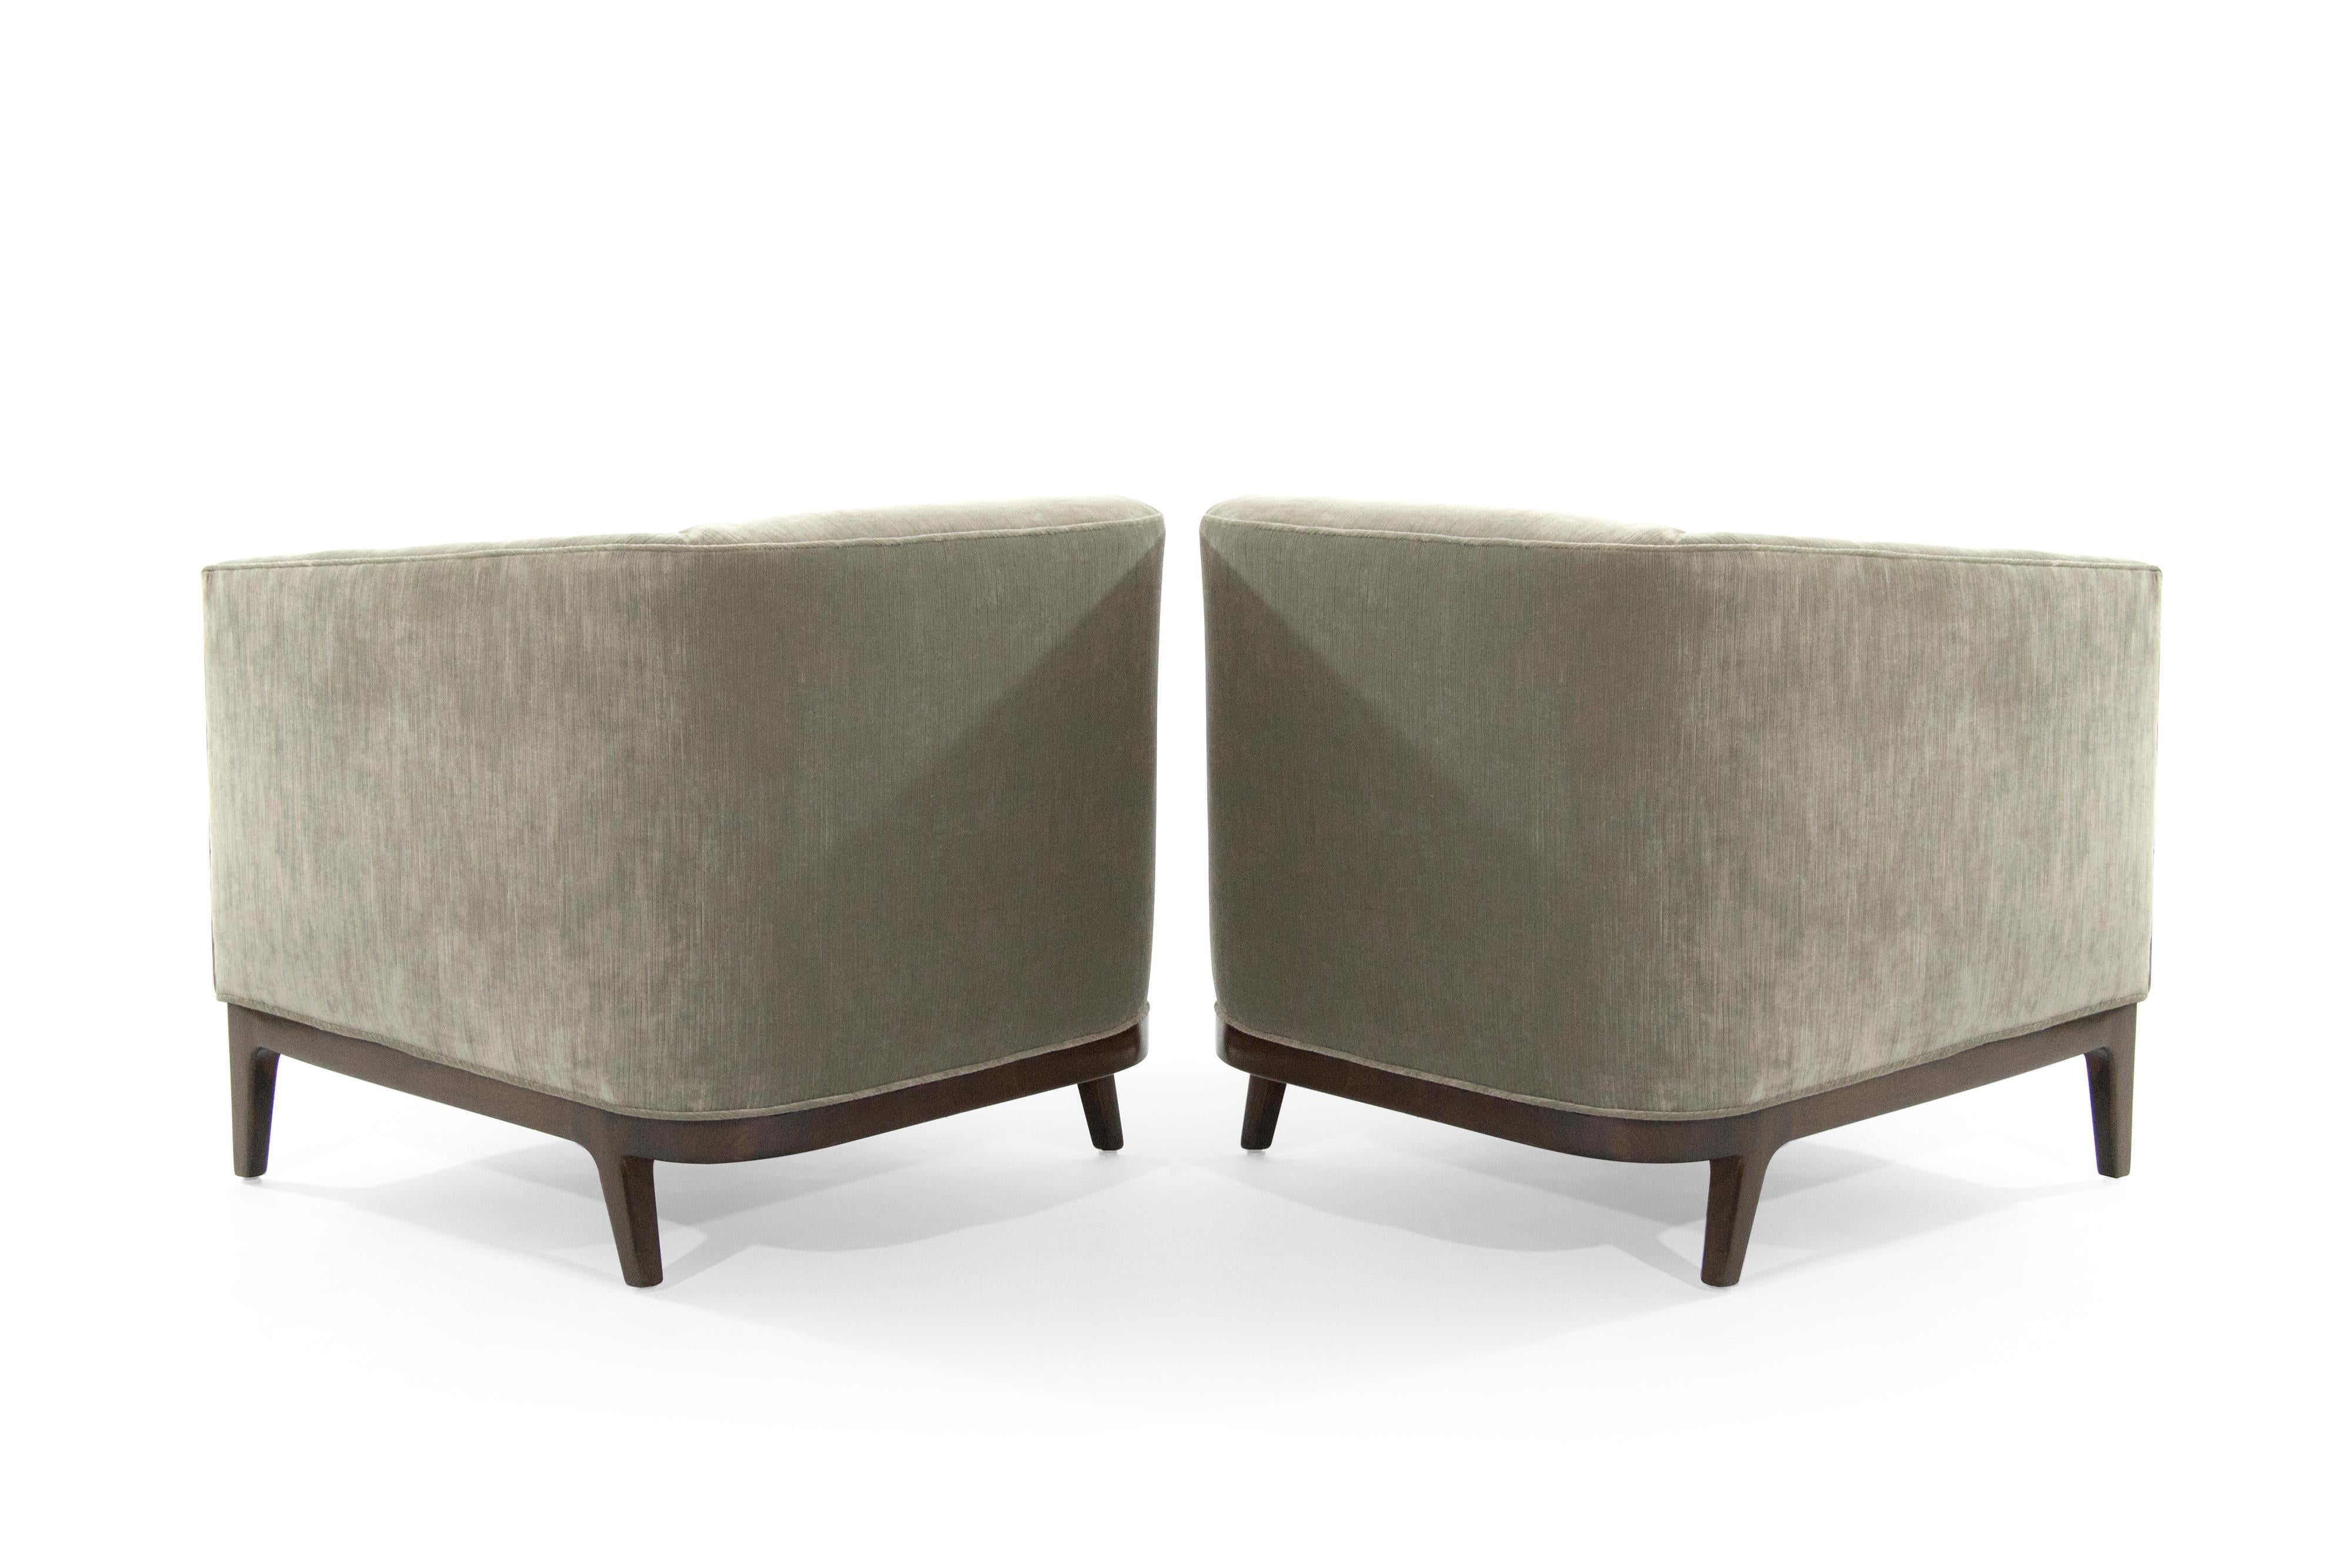 20th Century Mid-Century Modern Tub Chairs in Chenille